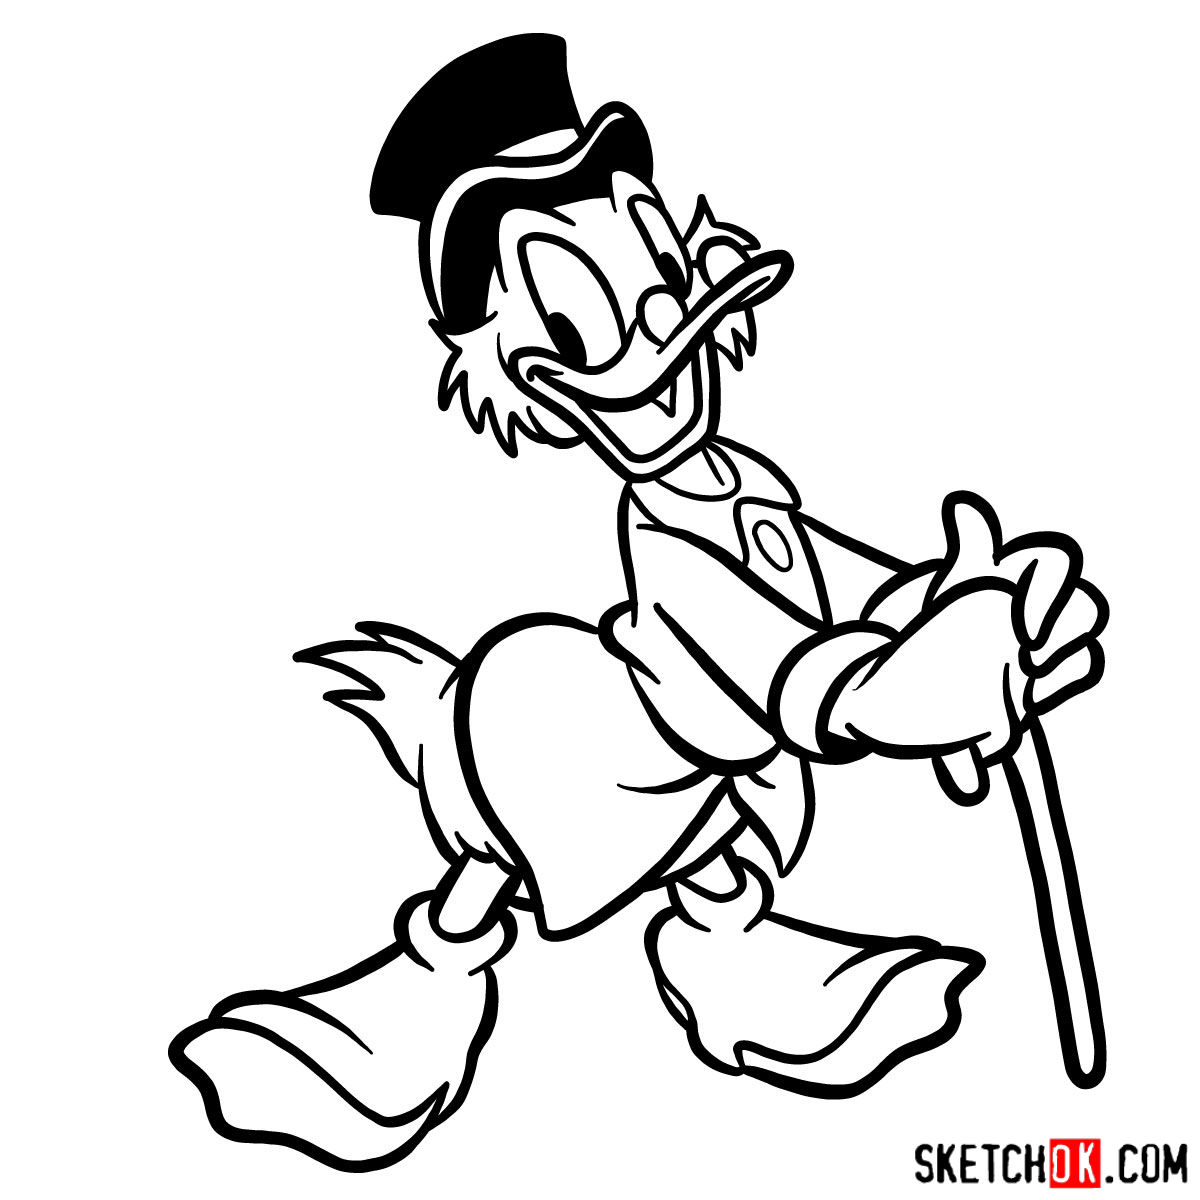 How to draw Scrooge McDuck - step 12